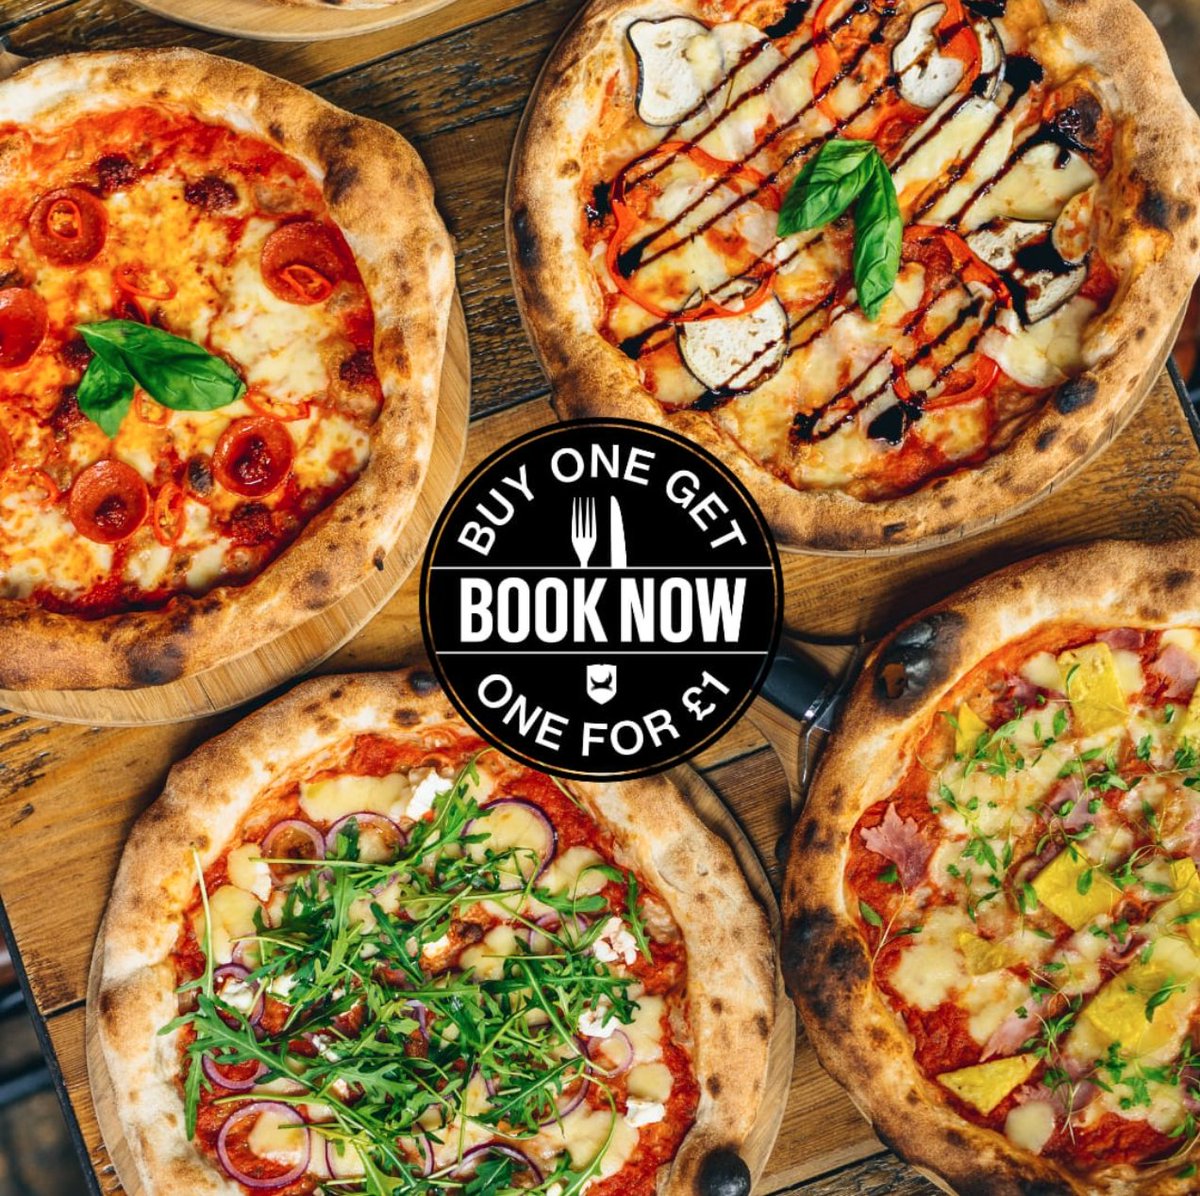 Fancy checking out this month's Awesome deal?🍕 Buy any Pizza and get another for just £1!🤩 Booking Only!😁 #brewdogbradford #bradfordbar #januarydeals #pizza